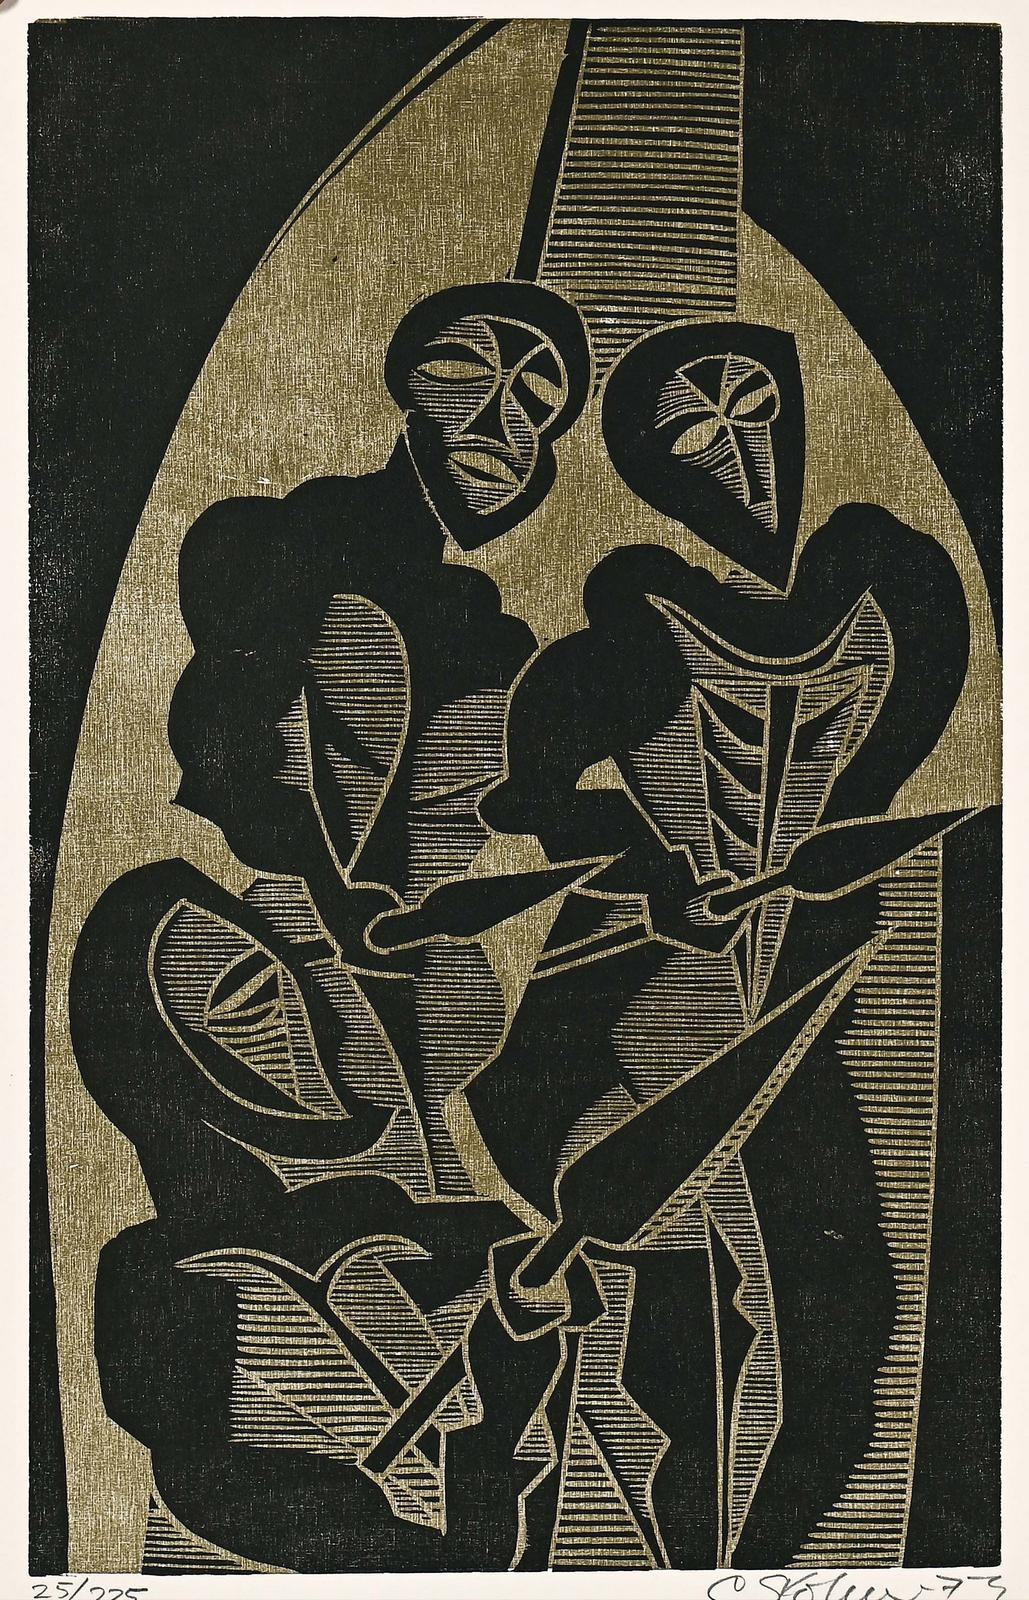 Mhlangane Dingane and Mbopa Lie in Wait (from the Assansination of Shaka portfolio) by Cecil Skotnes, 1973